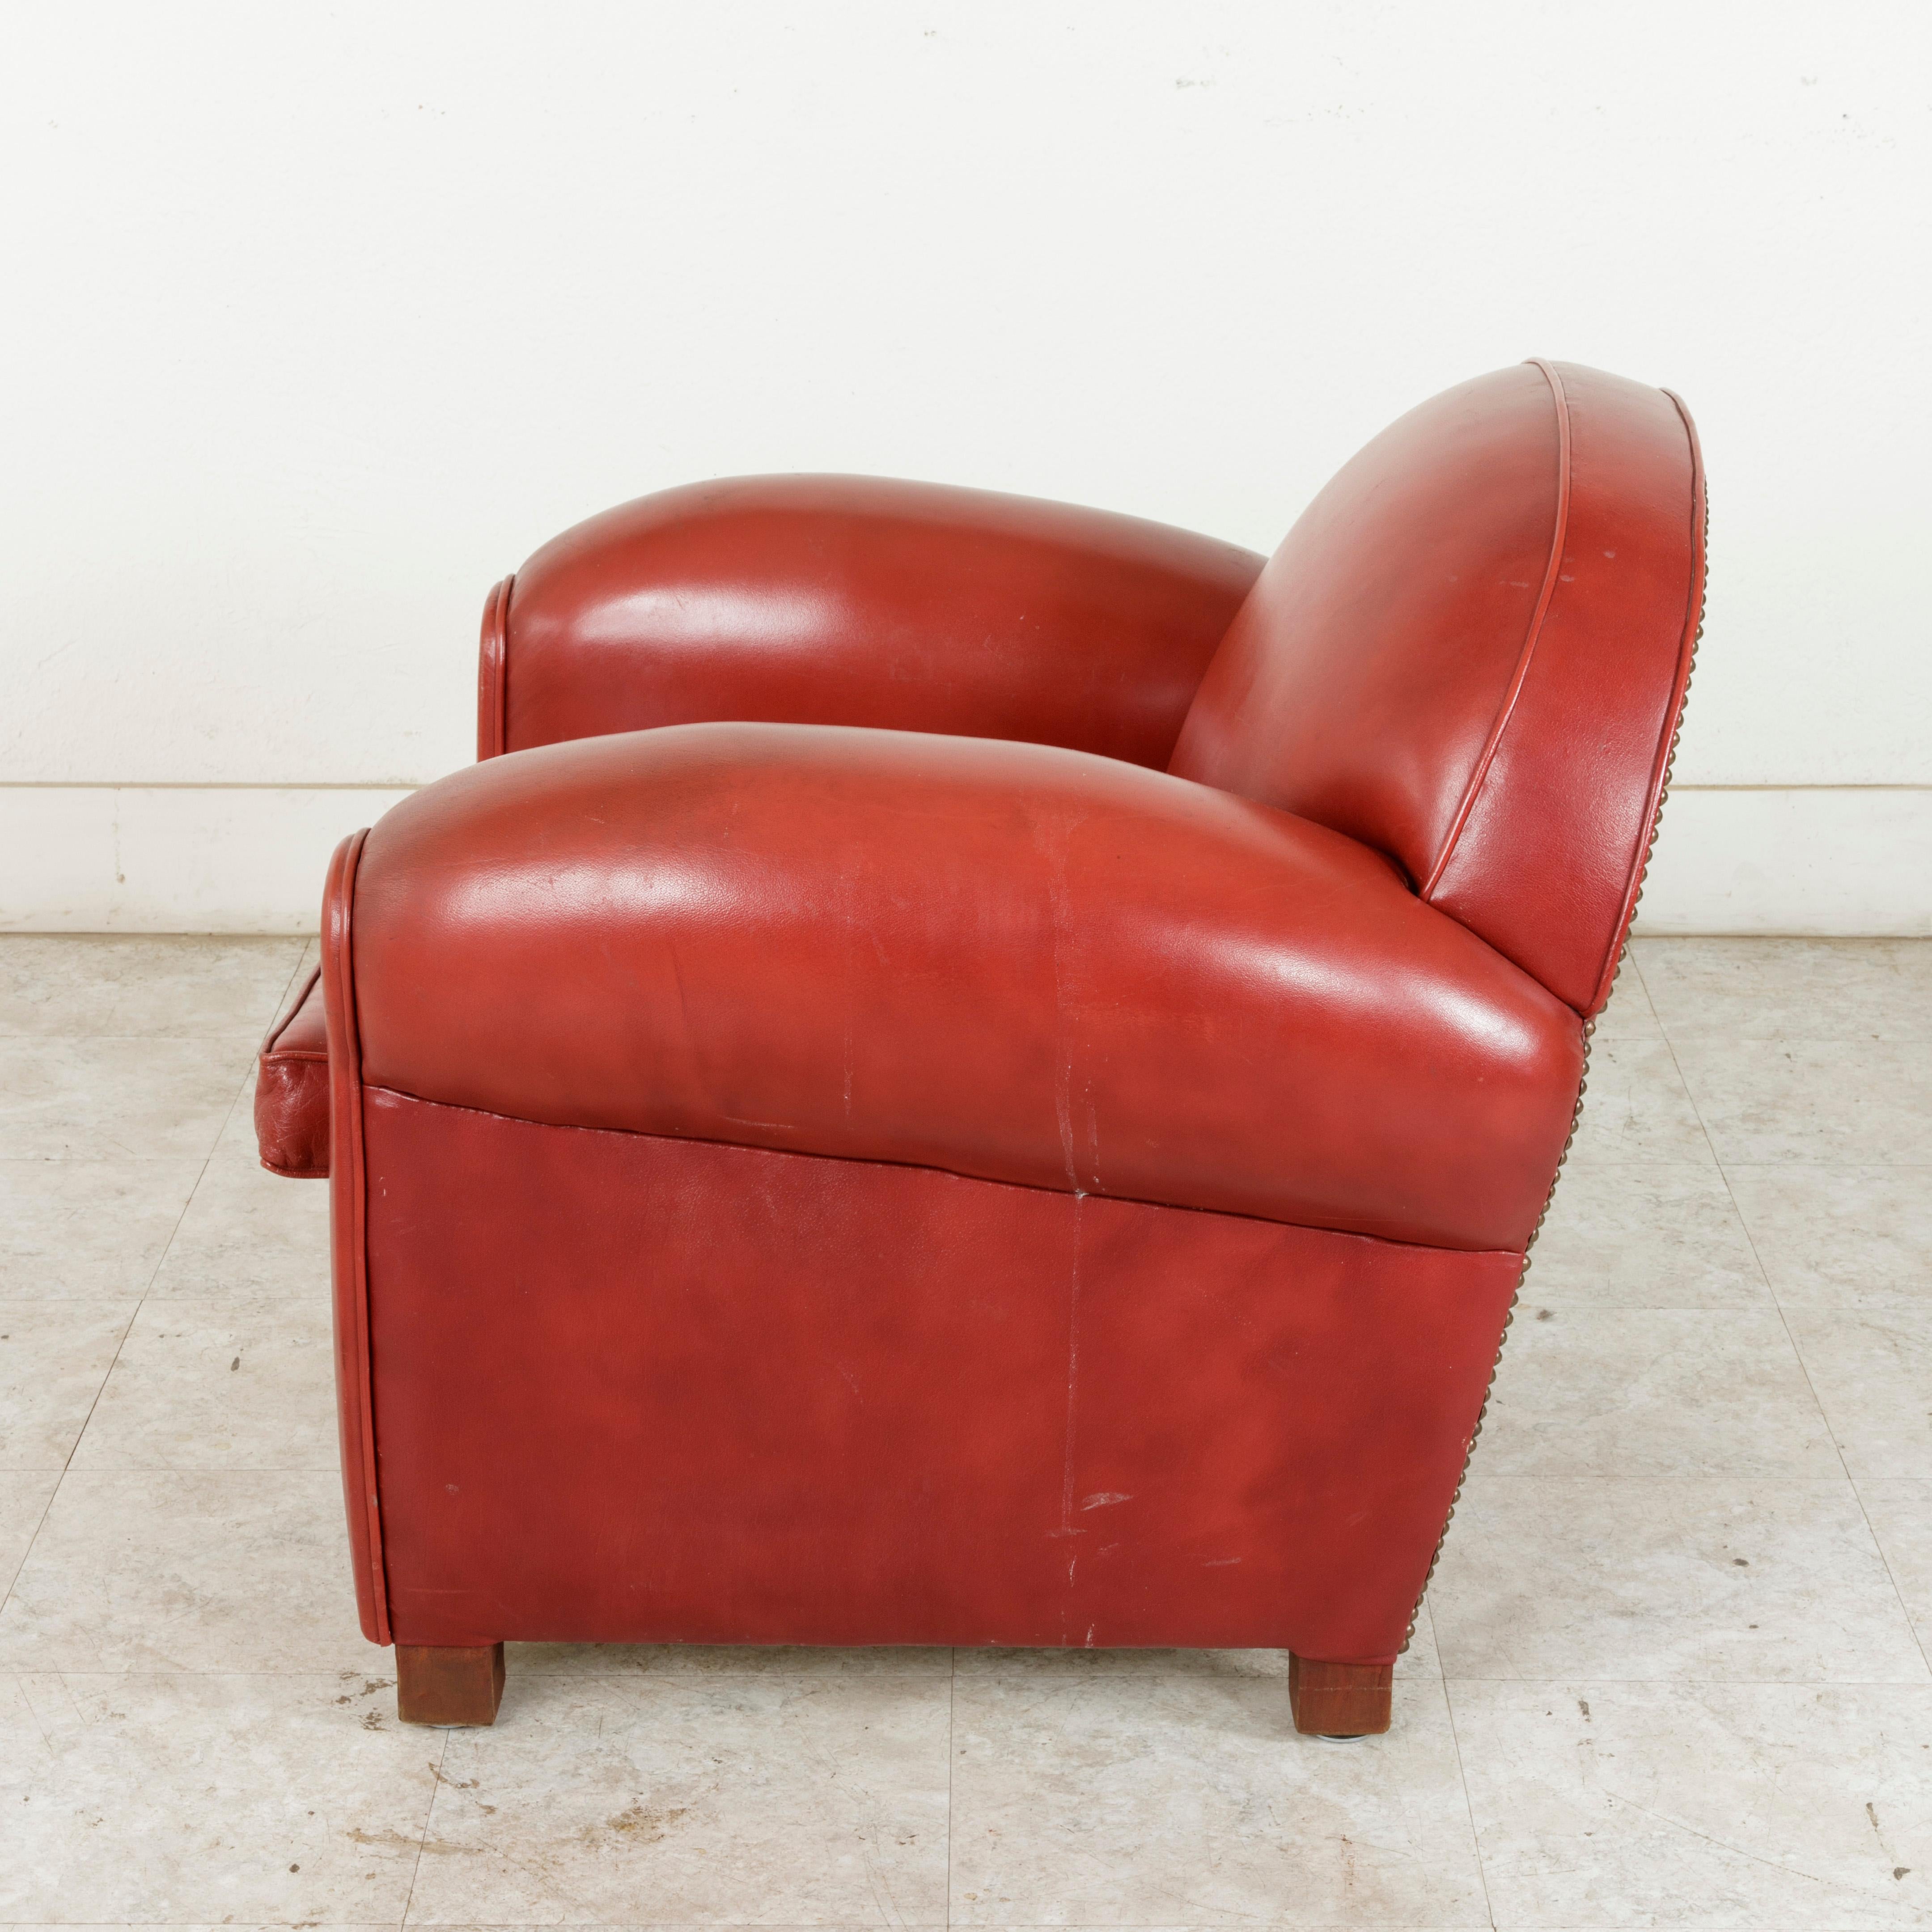 20th Century Midcentury French Art Deco Red Leather Club Chair or Lounge Chair, circa 1950